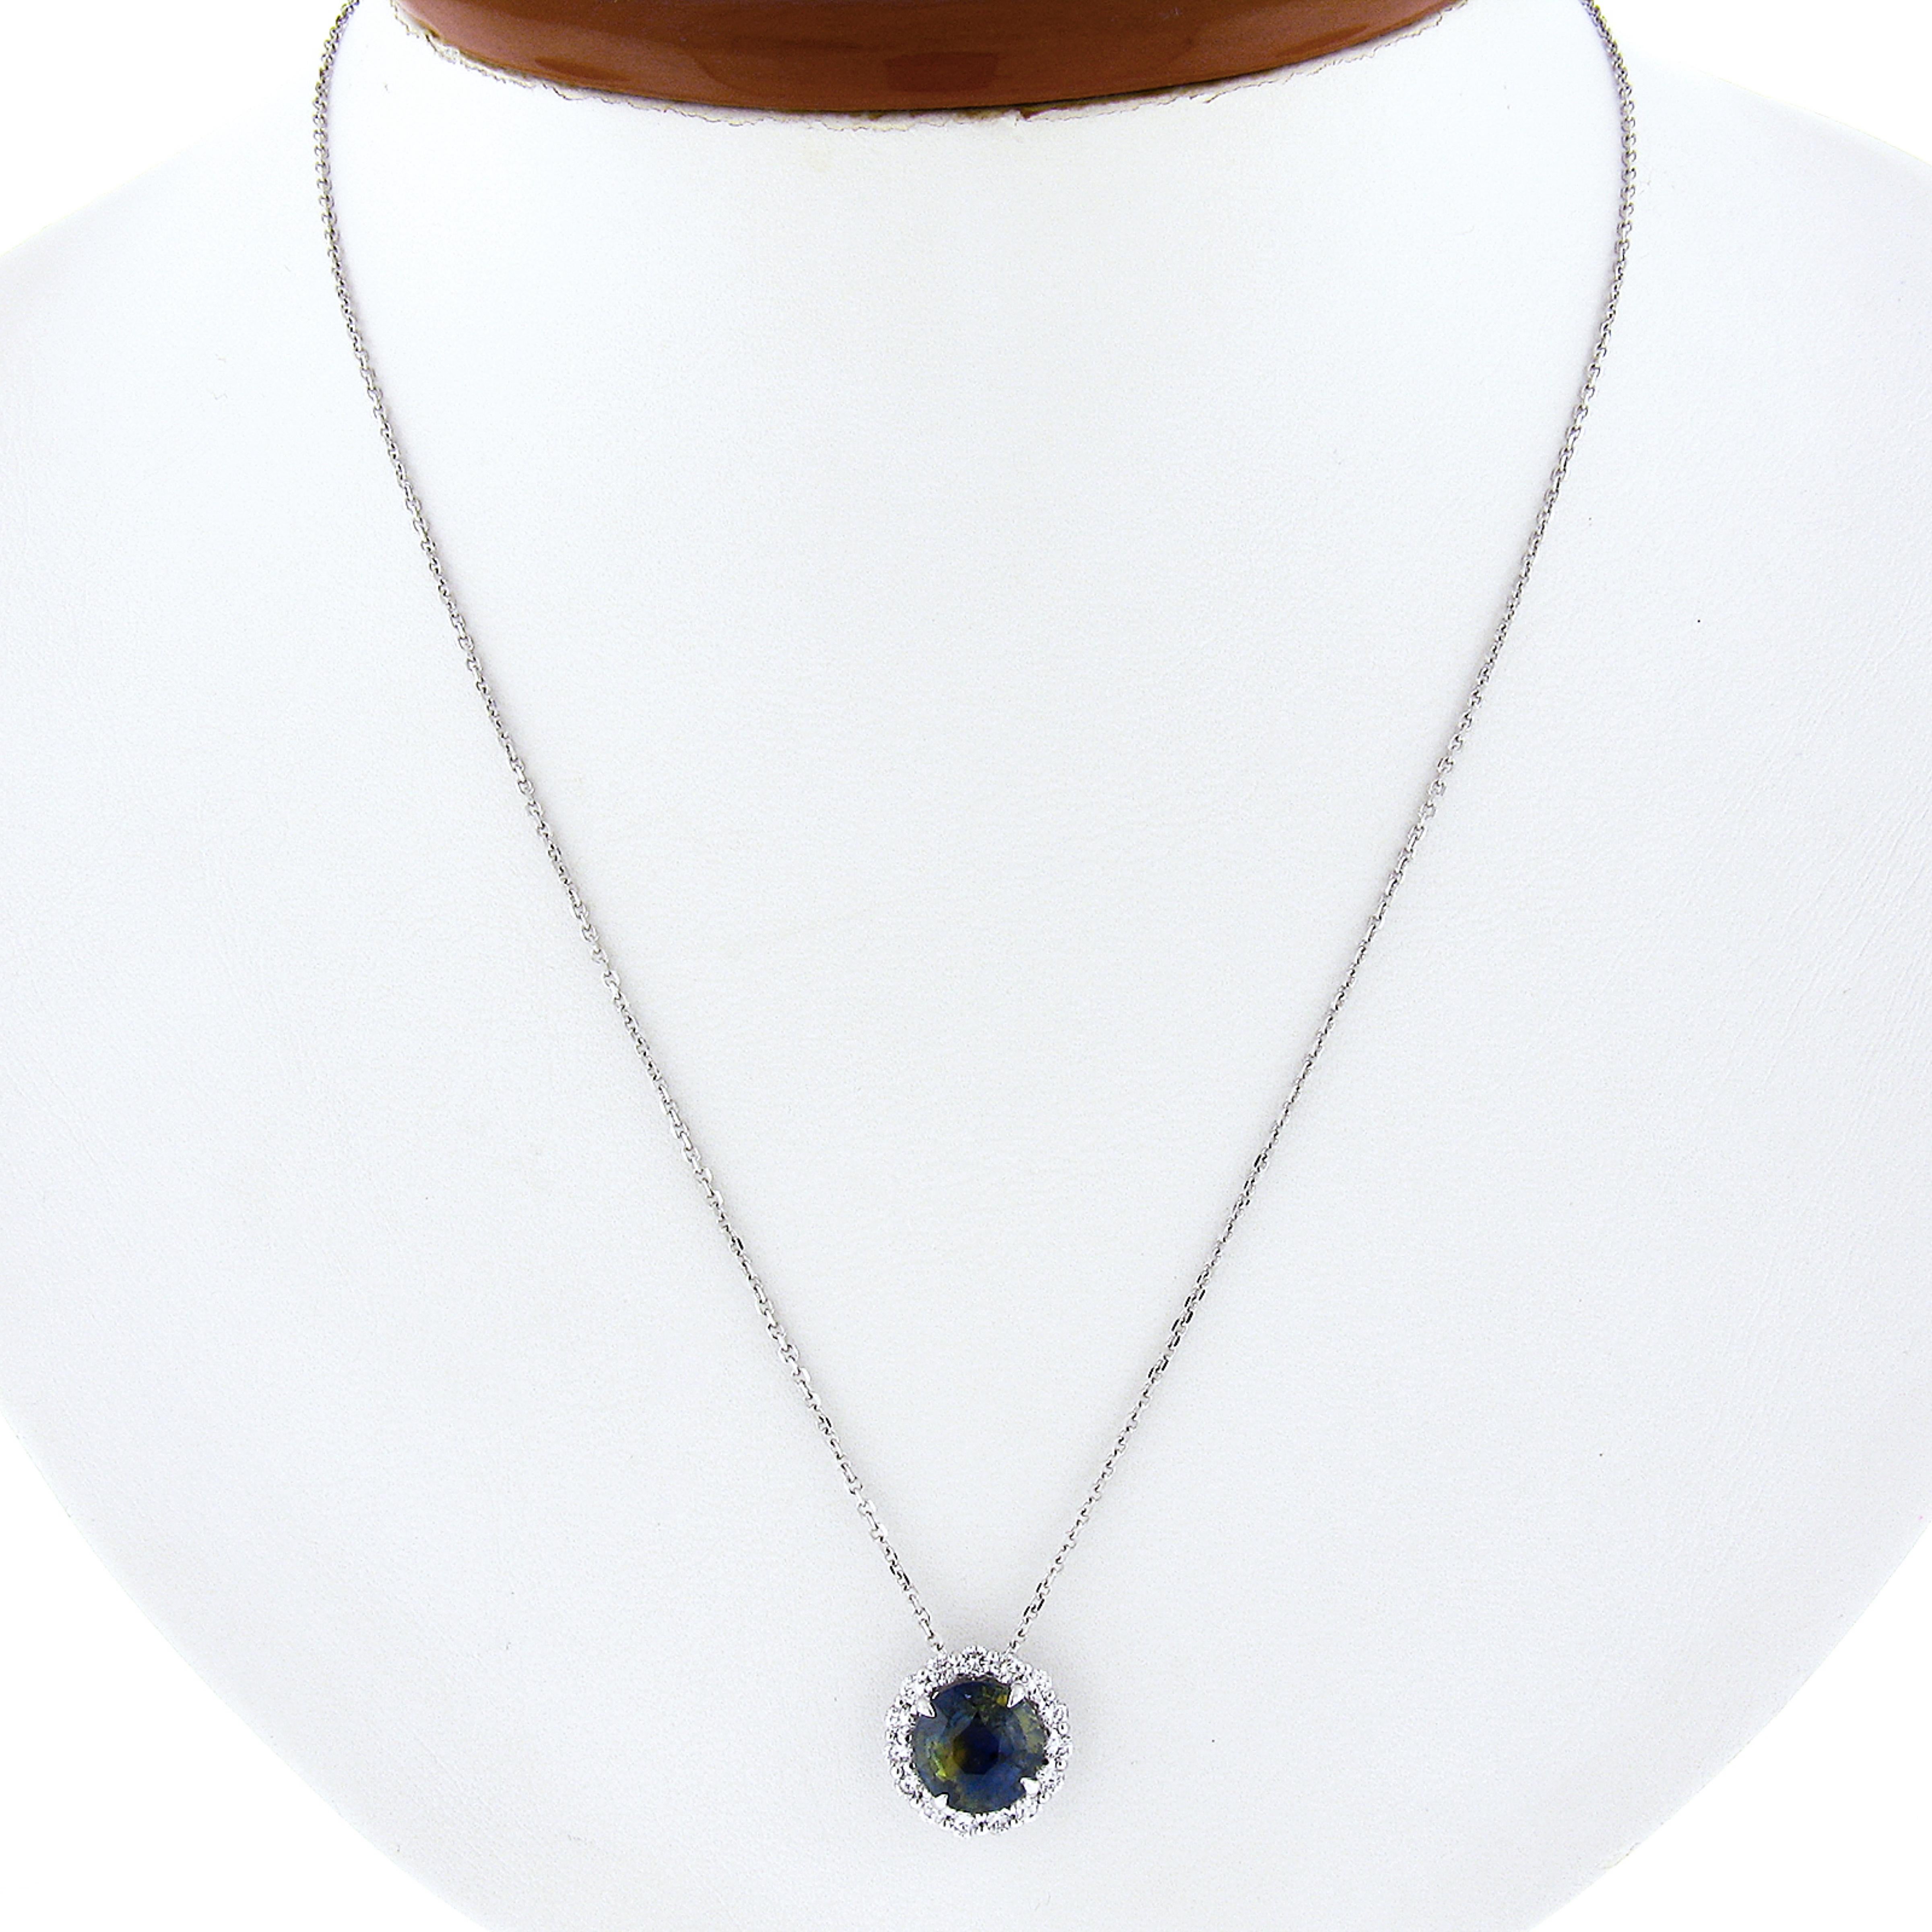 Here we have a gorgeous, brand new, solitaire pendant that is crafted in solid 14k white gold. It features a very unique and truly eye catching, GIA certified, round brilliant cut sapphire with naturally zoned blue and yellow colors. This fine